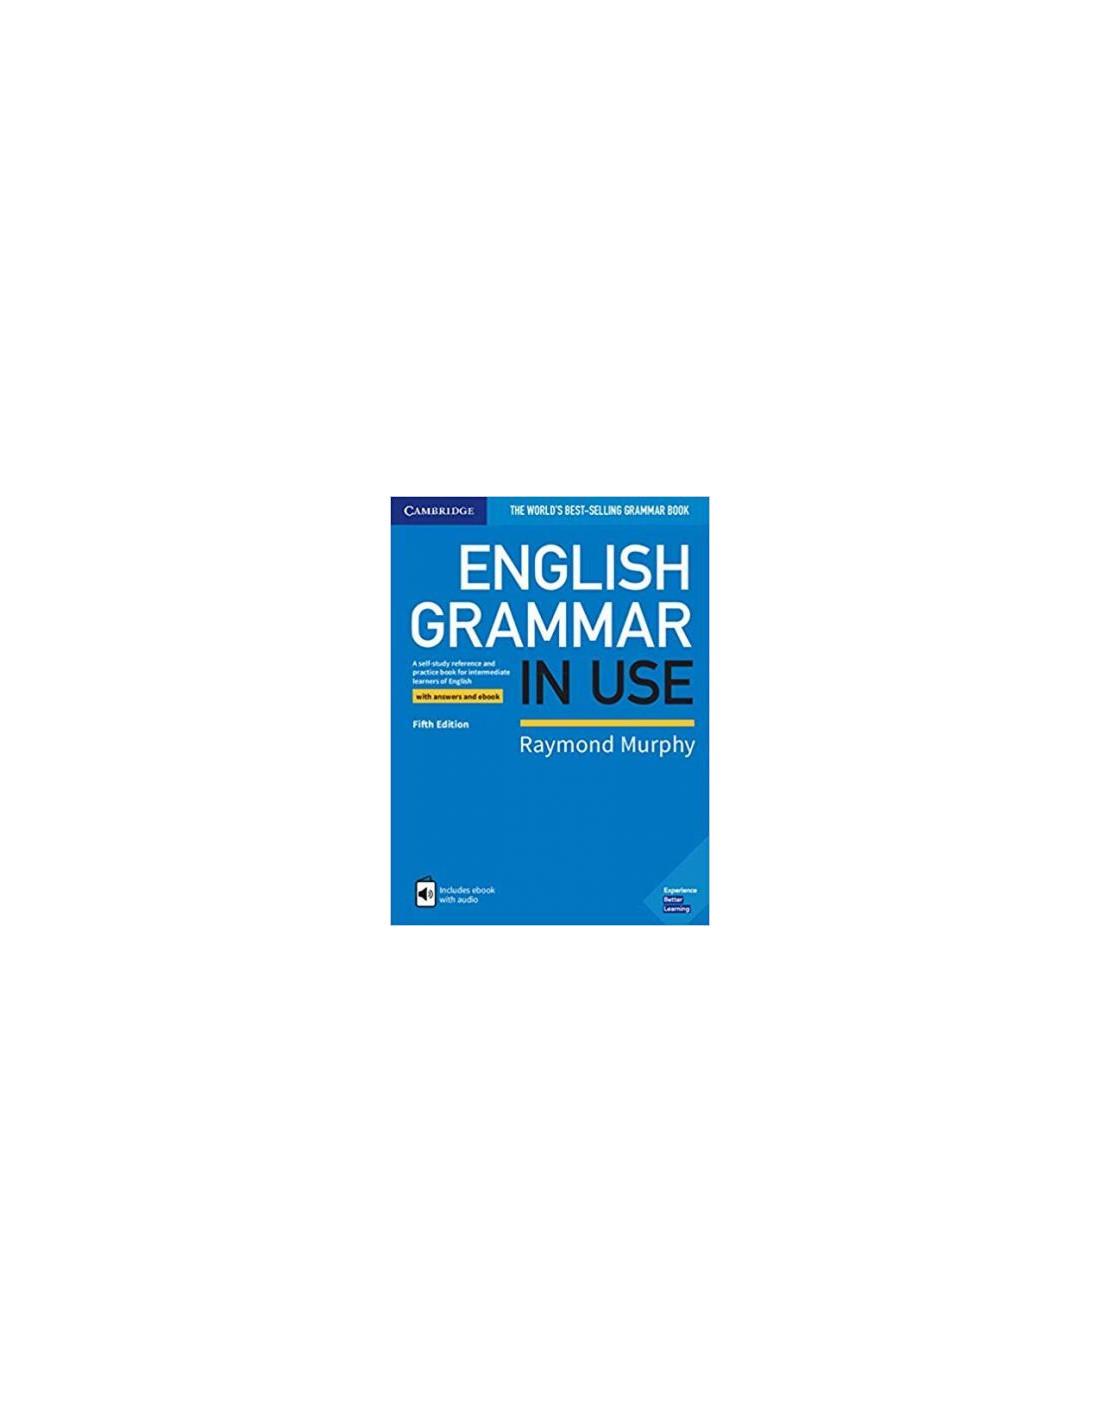 Interactive　in　eBook　Practice　Intermediate　and　English　Reference　Answers　A　Book　study　for　with　Book　Grammar　and　Use　Self-